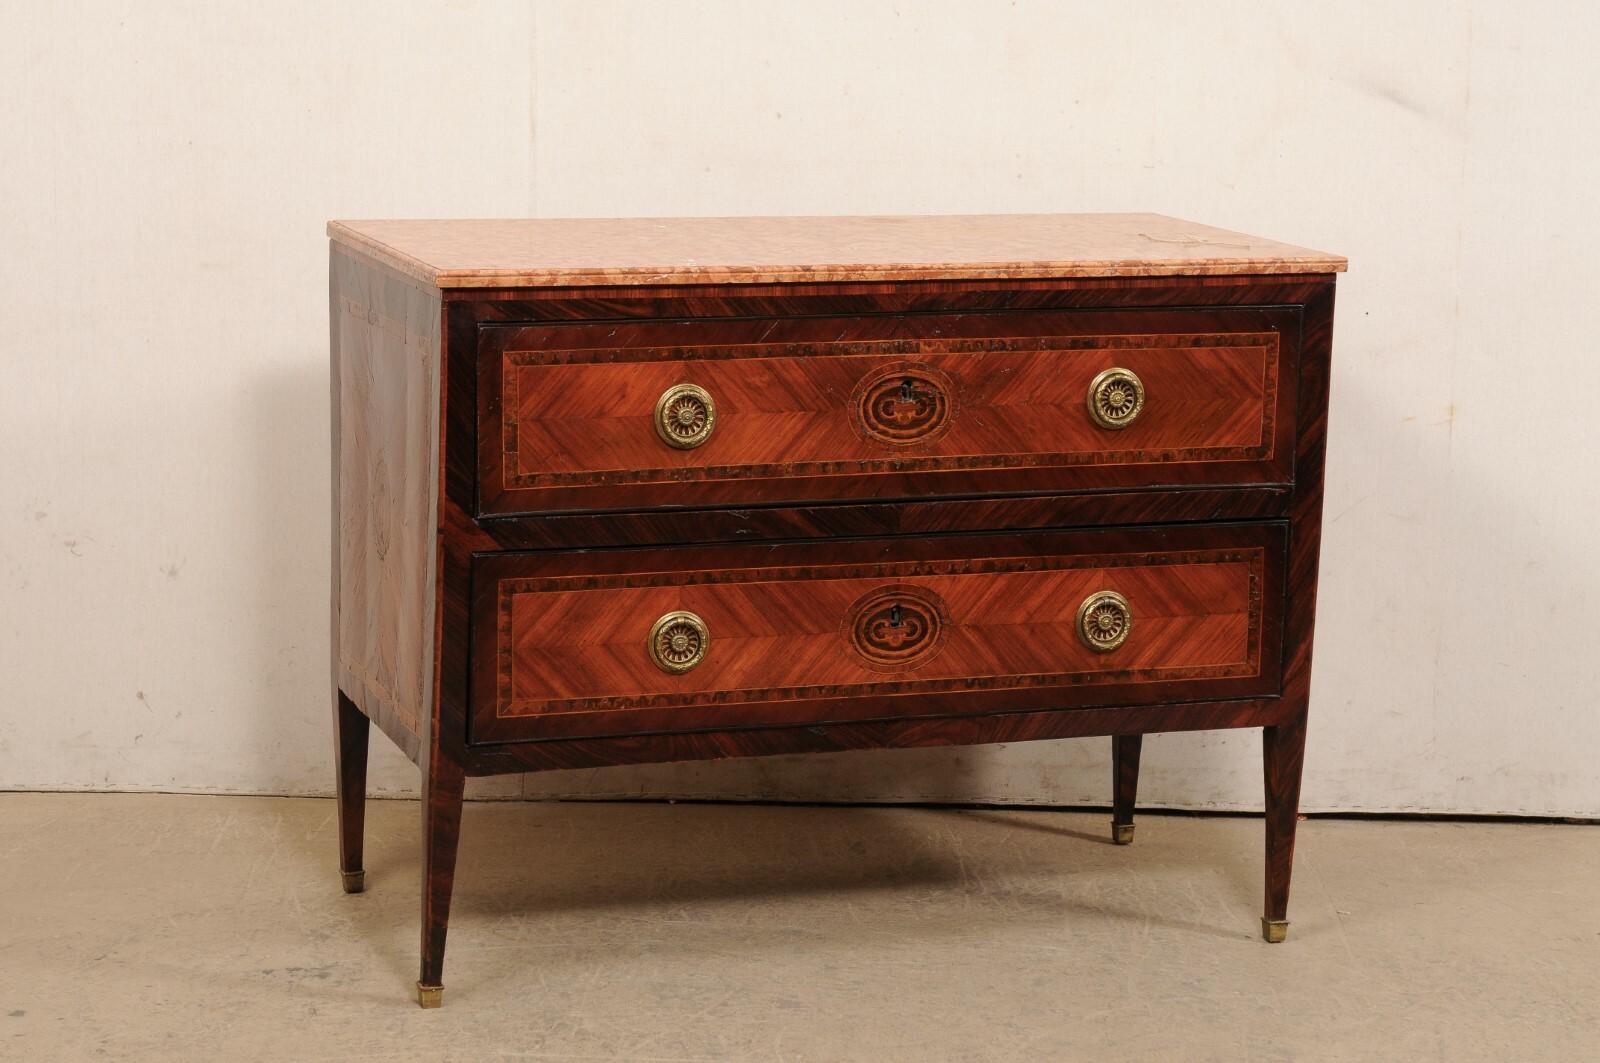 An Italian raised two-drawer chest, with its original marble top, from the late 18th century. This antique chest from Italy retains its original marble top, which rests atop a case beautifully adorn in veneered inlays and banding, which houses two